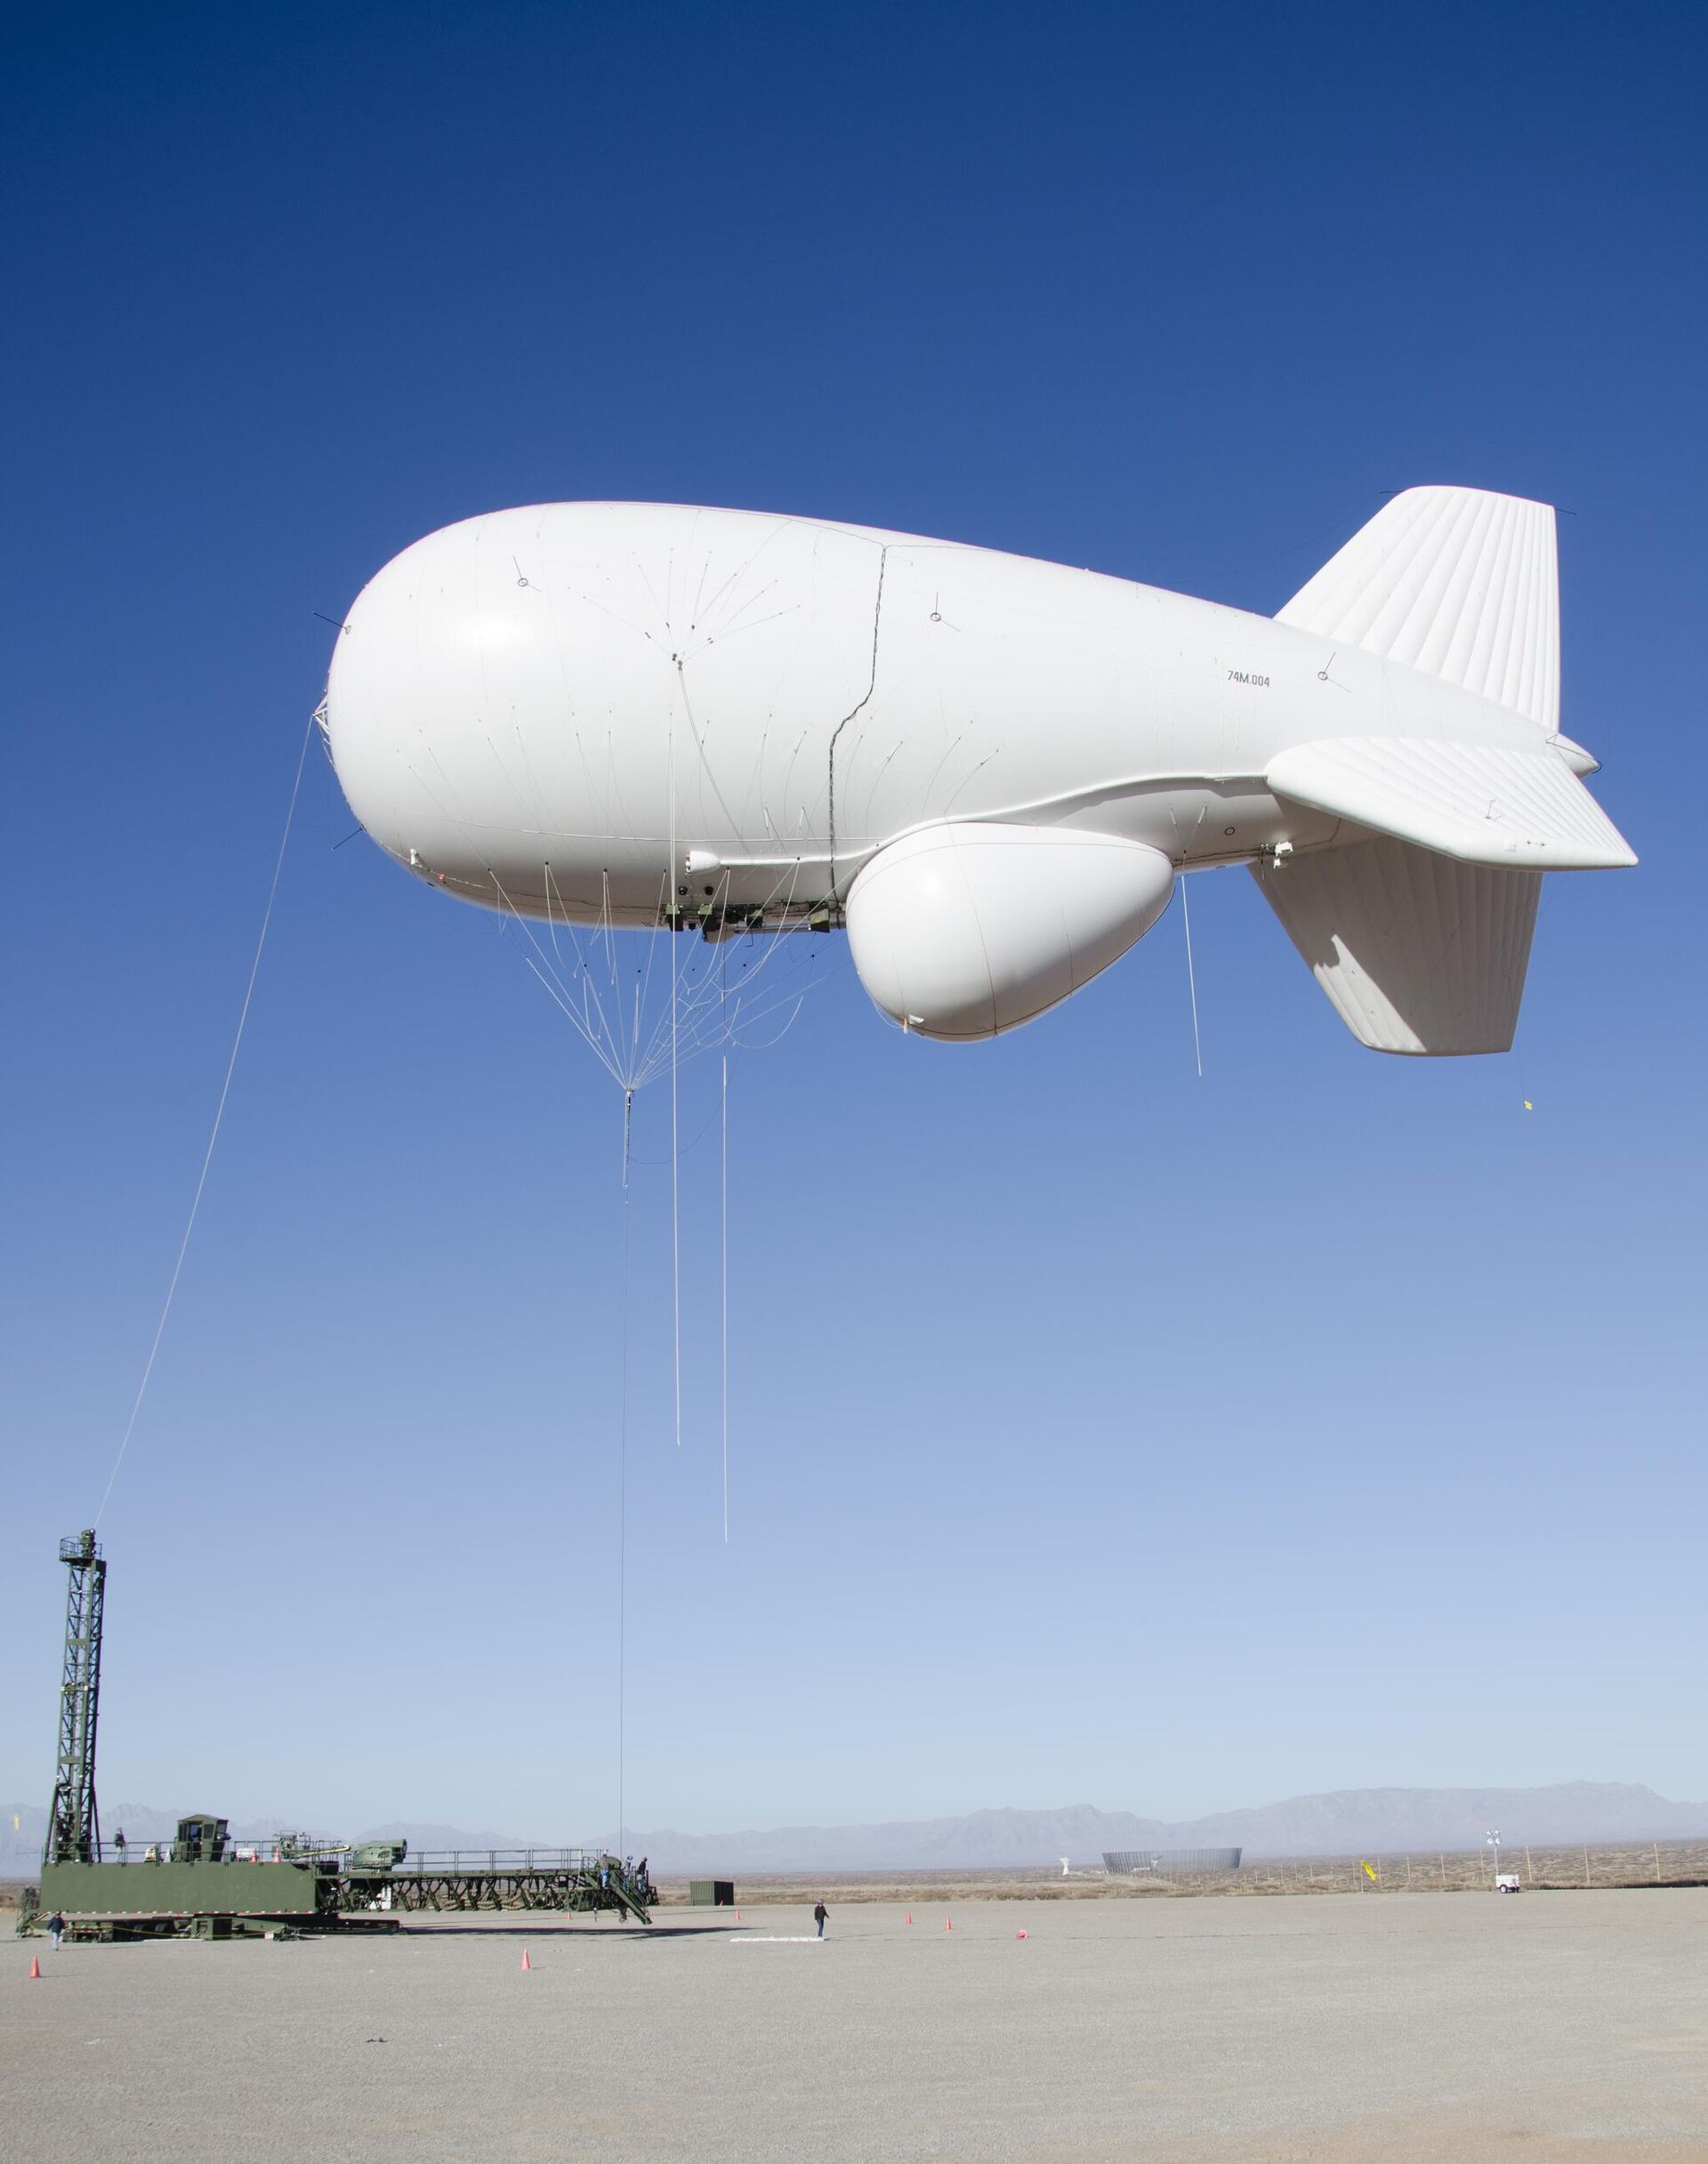 A JLENS aerostat is launched at White Sands Missile Range in New Mexico. The aerostat is equipped with a powerful radar. - Sputnik International, 1920, 09.02.2023